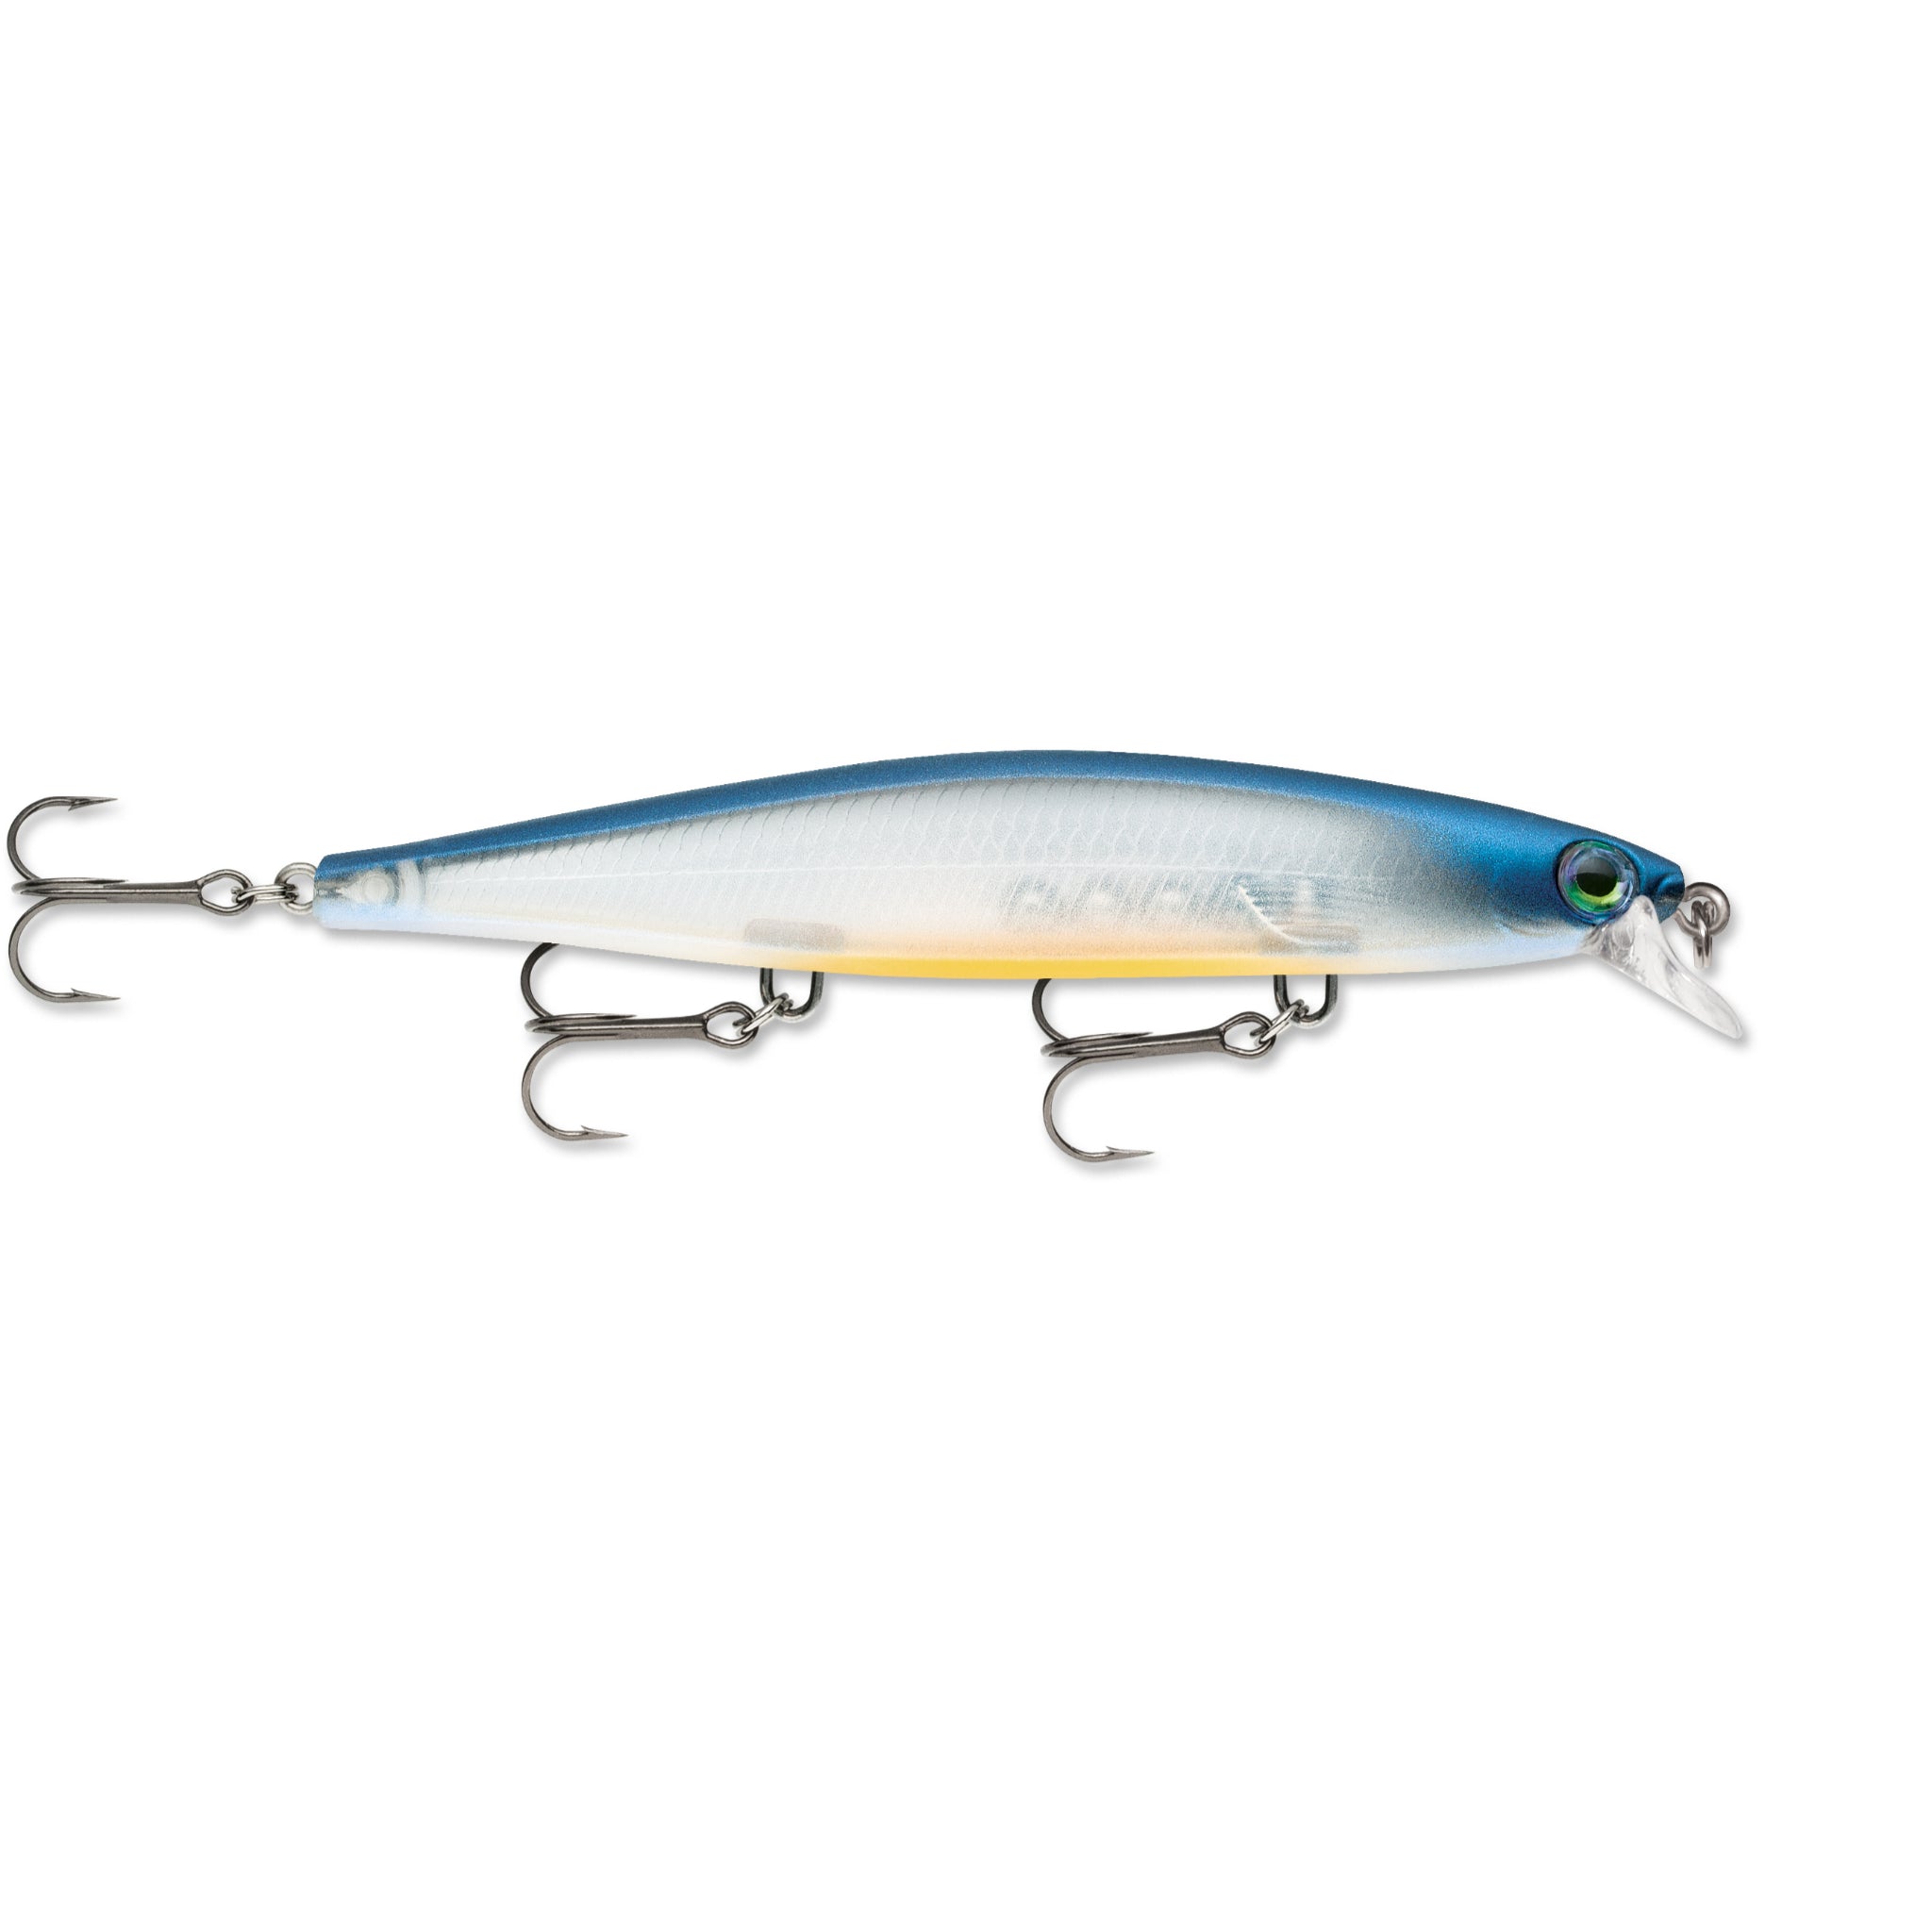 First Look: Rapala Slow-Rising Shadow Rap - On The Water